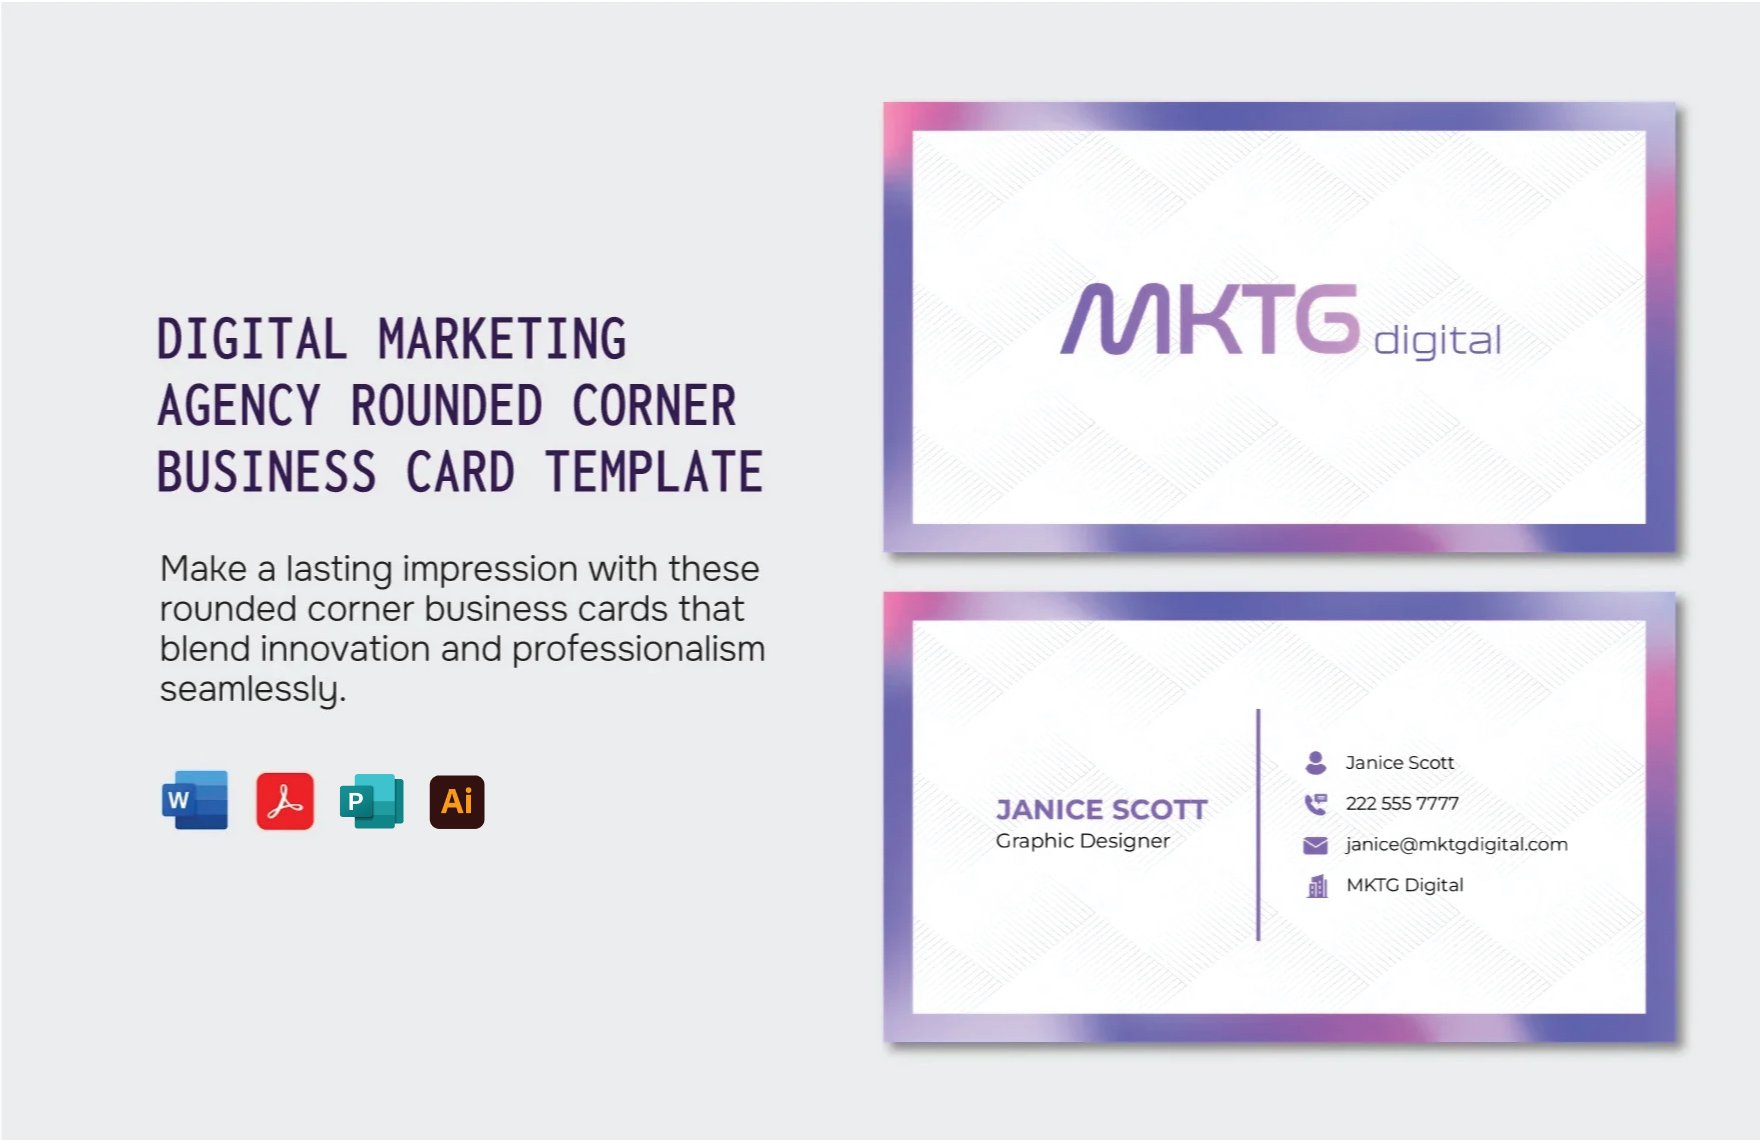 Digital Marketing Agency Rounded Corner Business Card Template in Word, PDF, Illustrator, Publisher